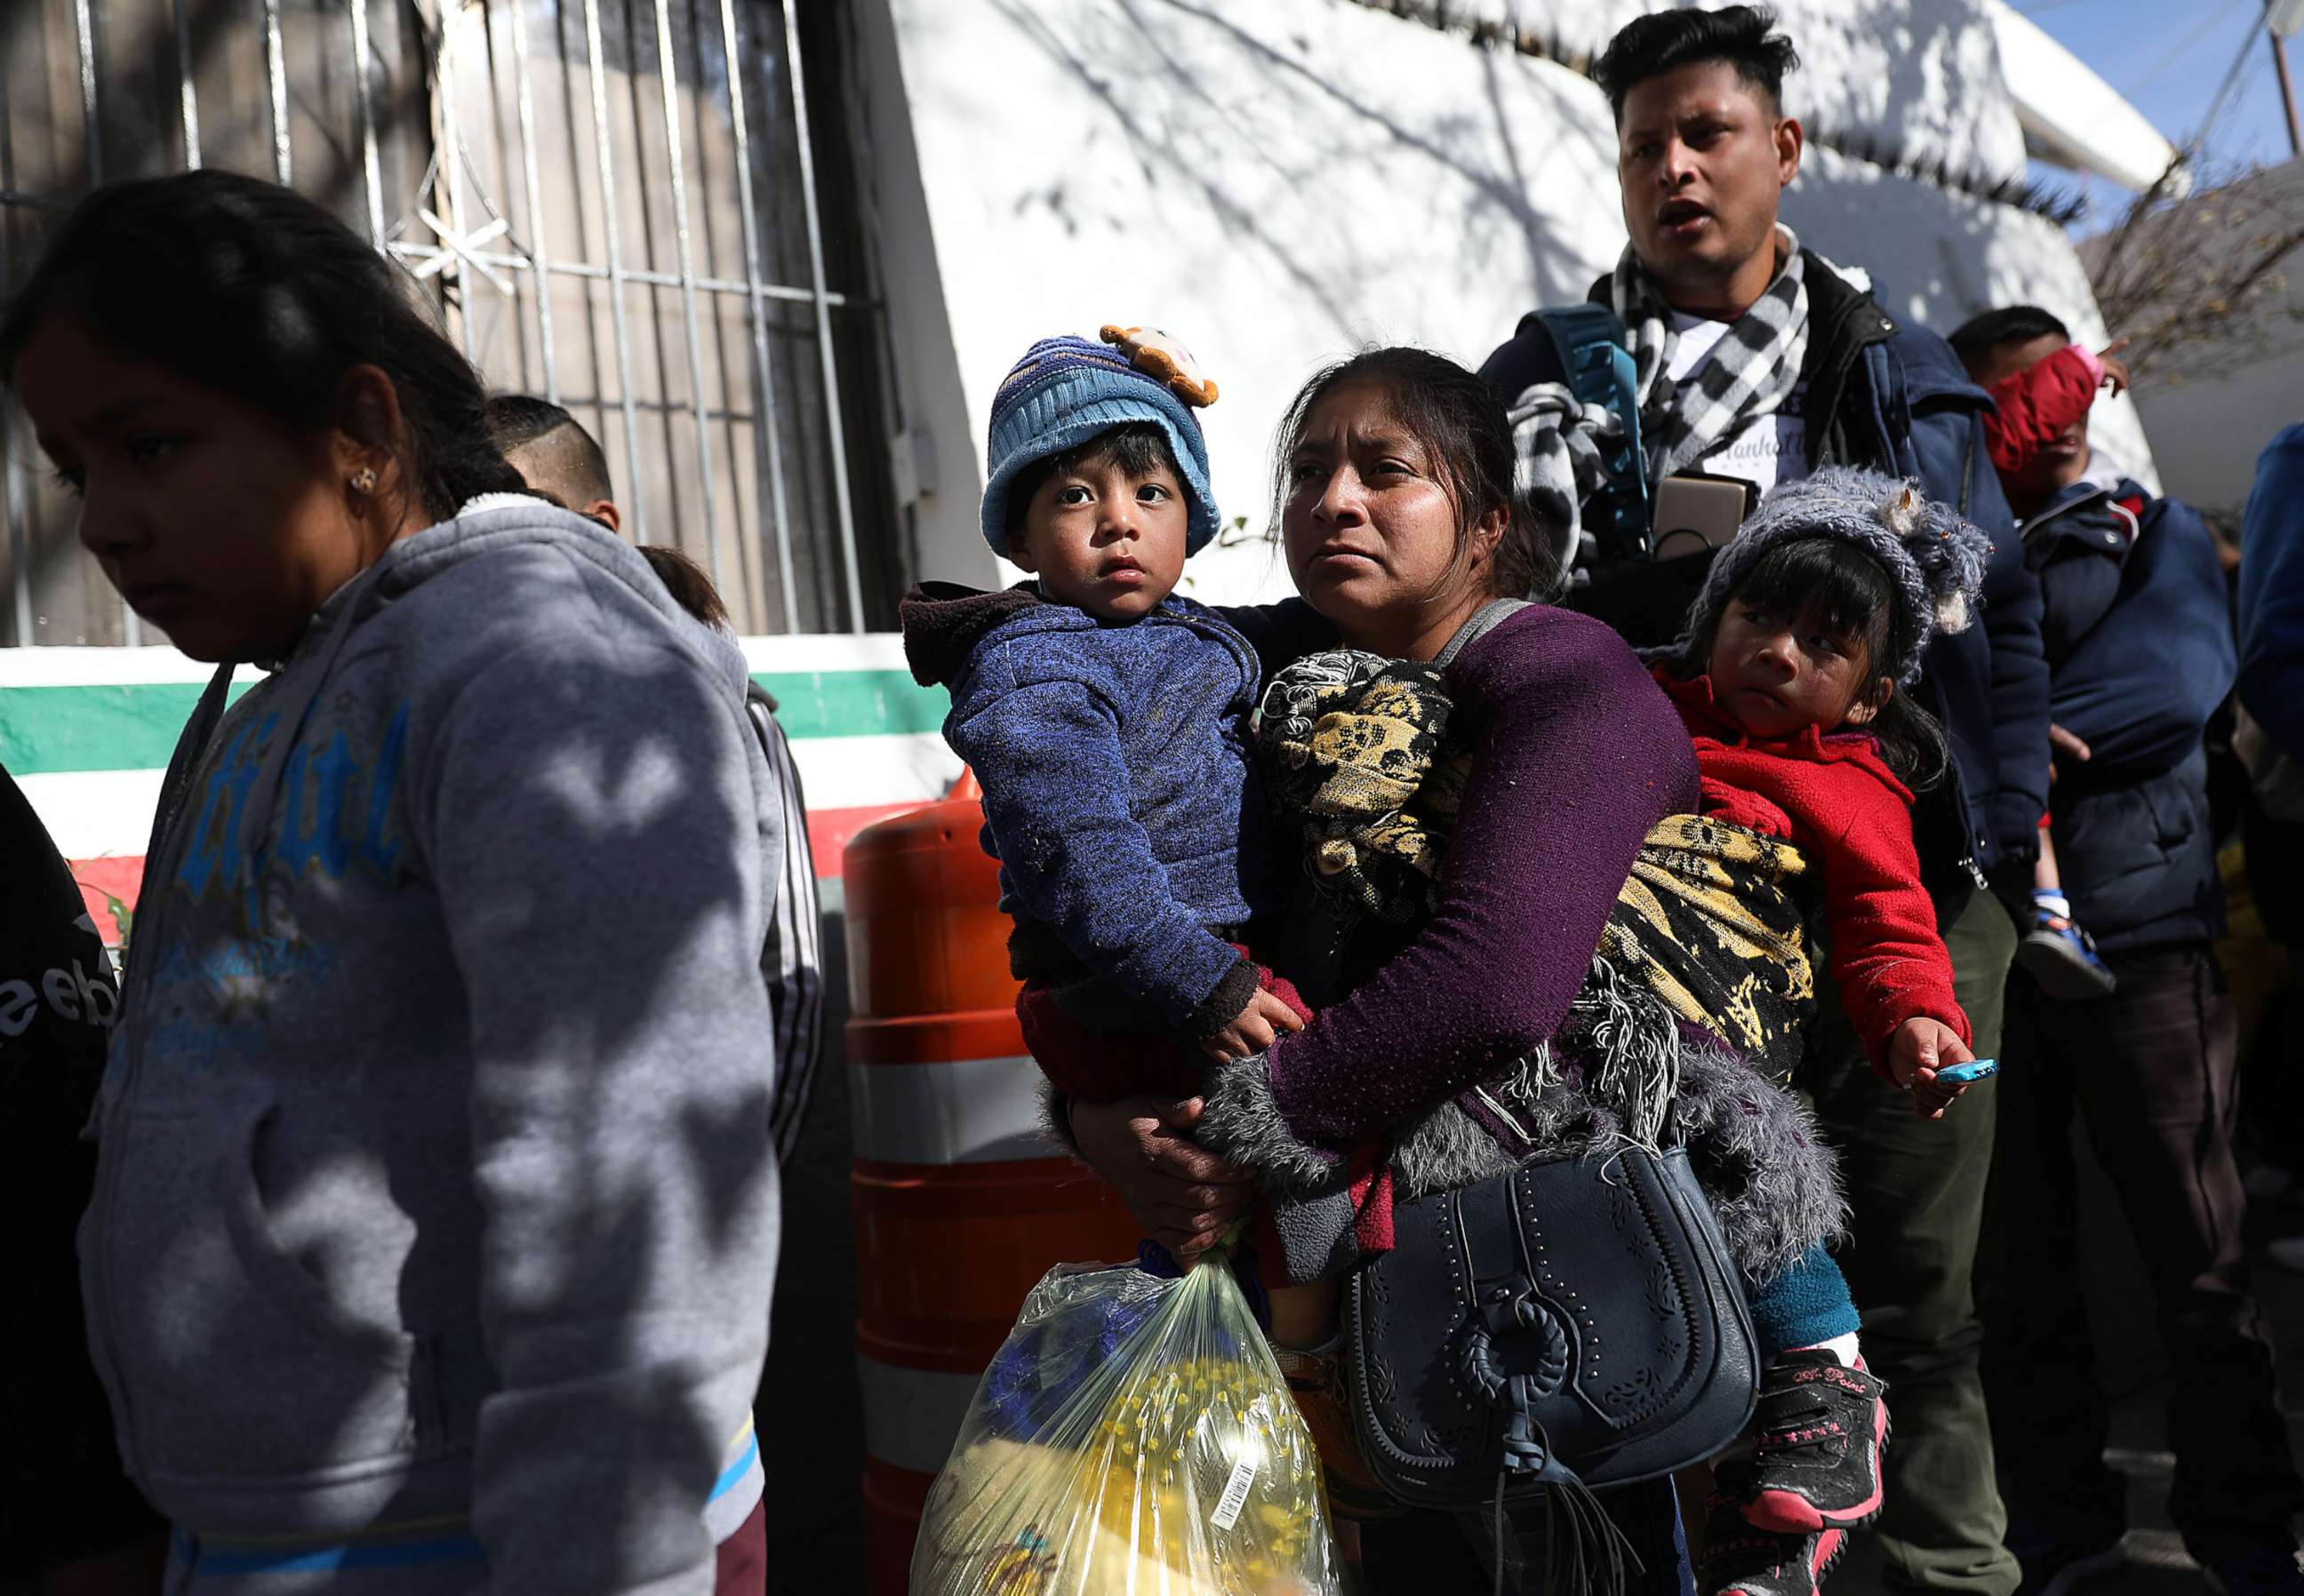 PHOTO: A group of people wait to cross the Paso Del Norte Port of Entry bridge to turn themselves in to the U.S. Customs and Border Protection personnel for asylum consideration on Jan. 13, 2019 in Ciudad Juarez, Mexico.